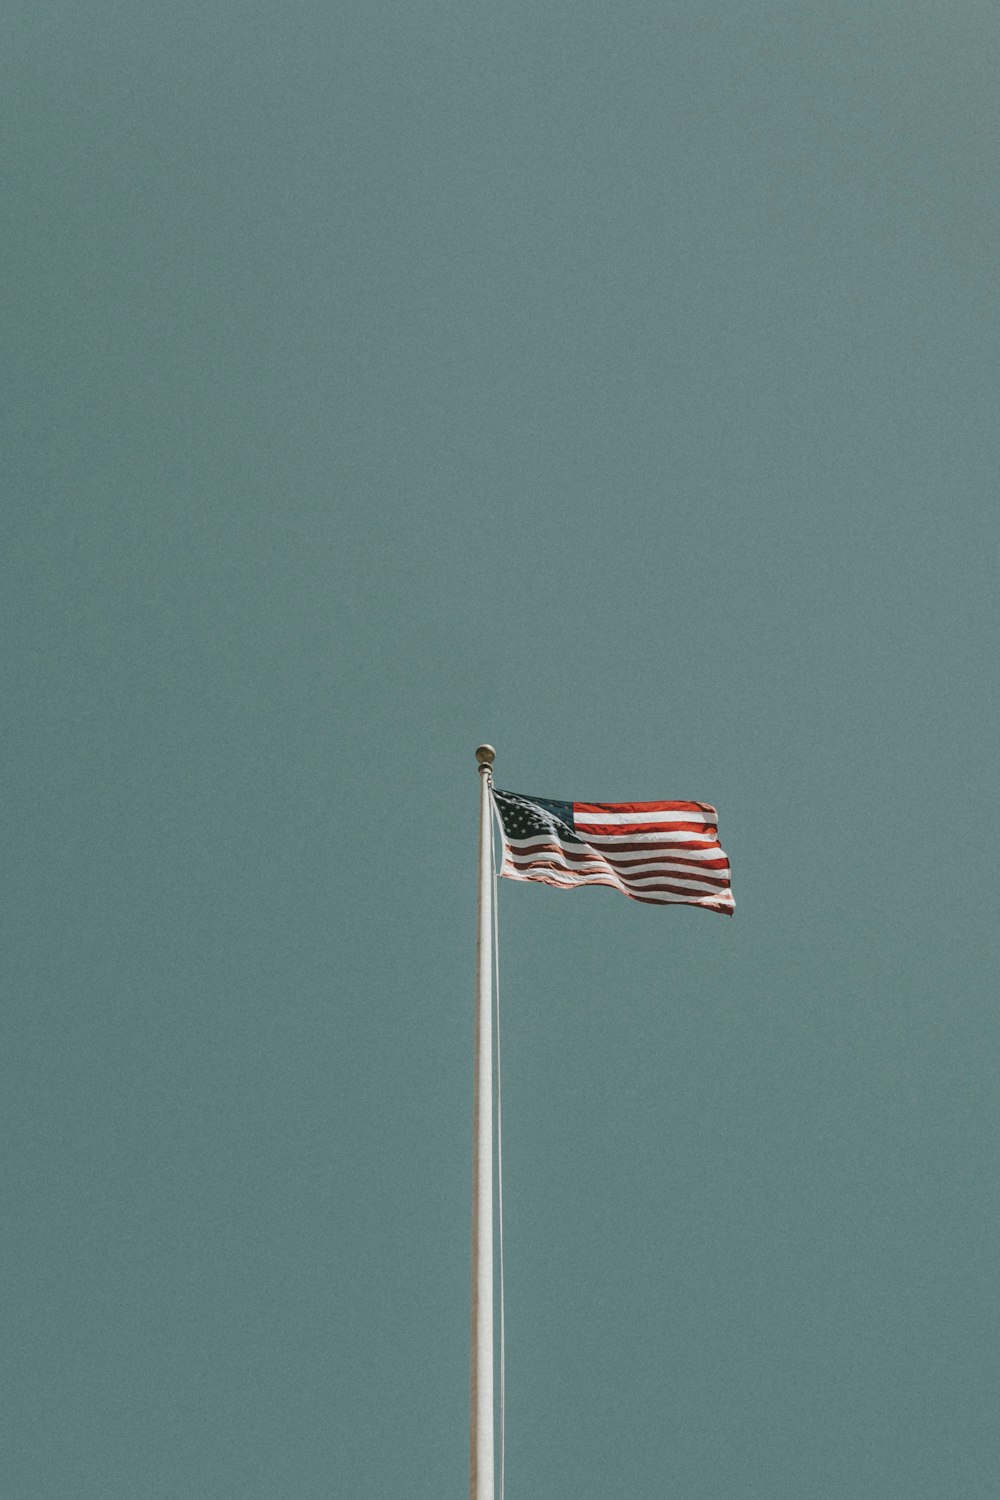 us a flag on pole under blue sky during daytime